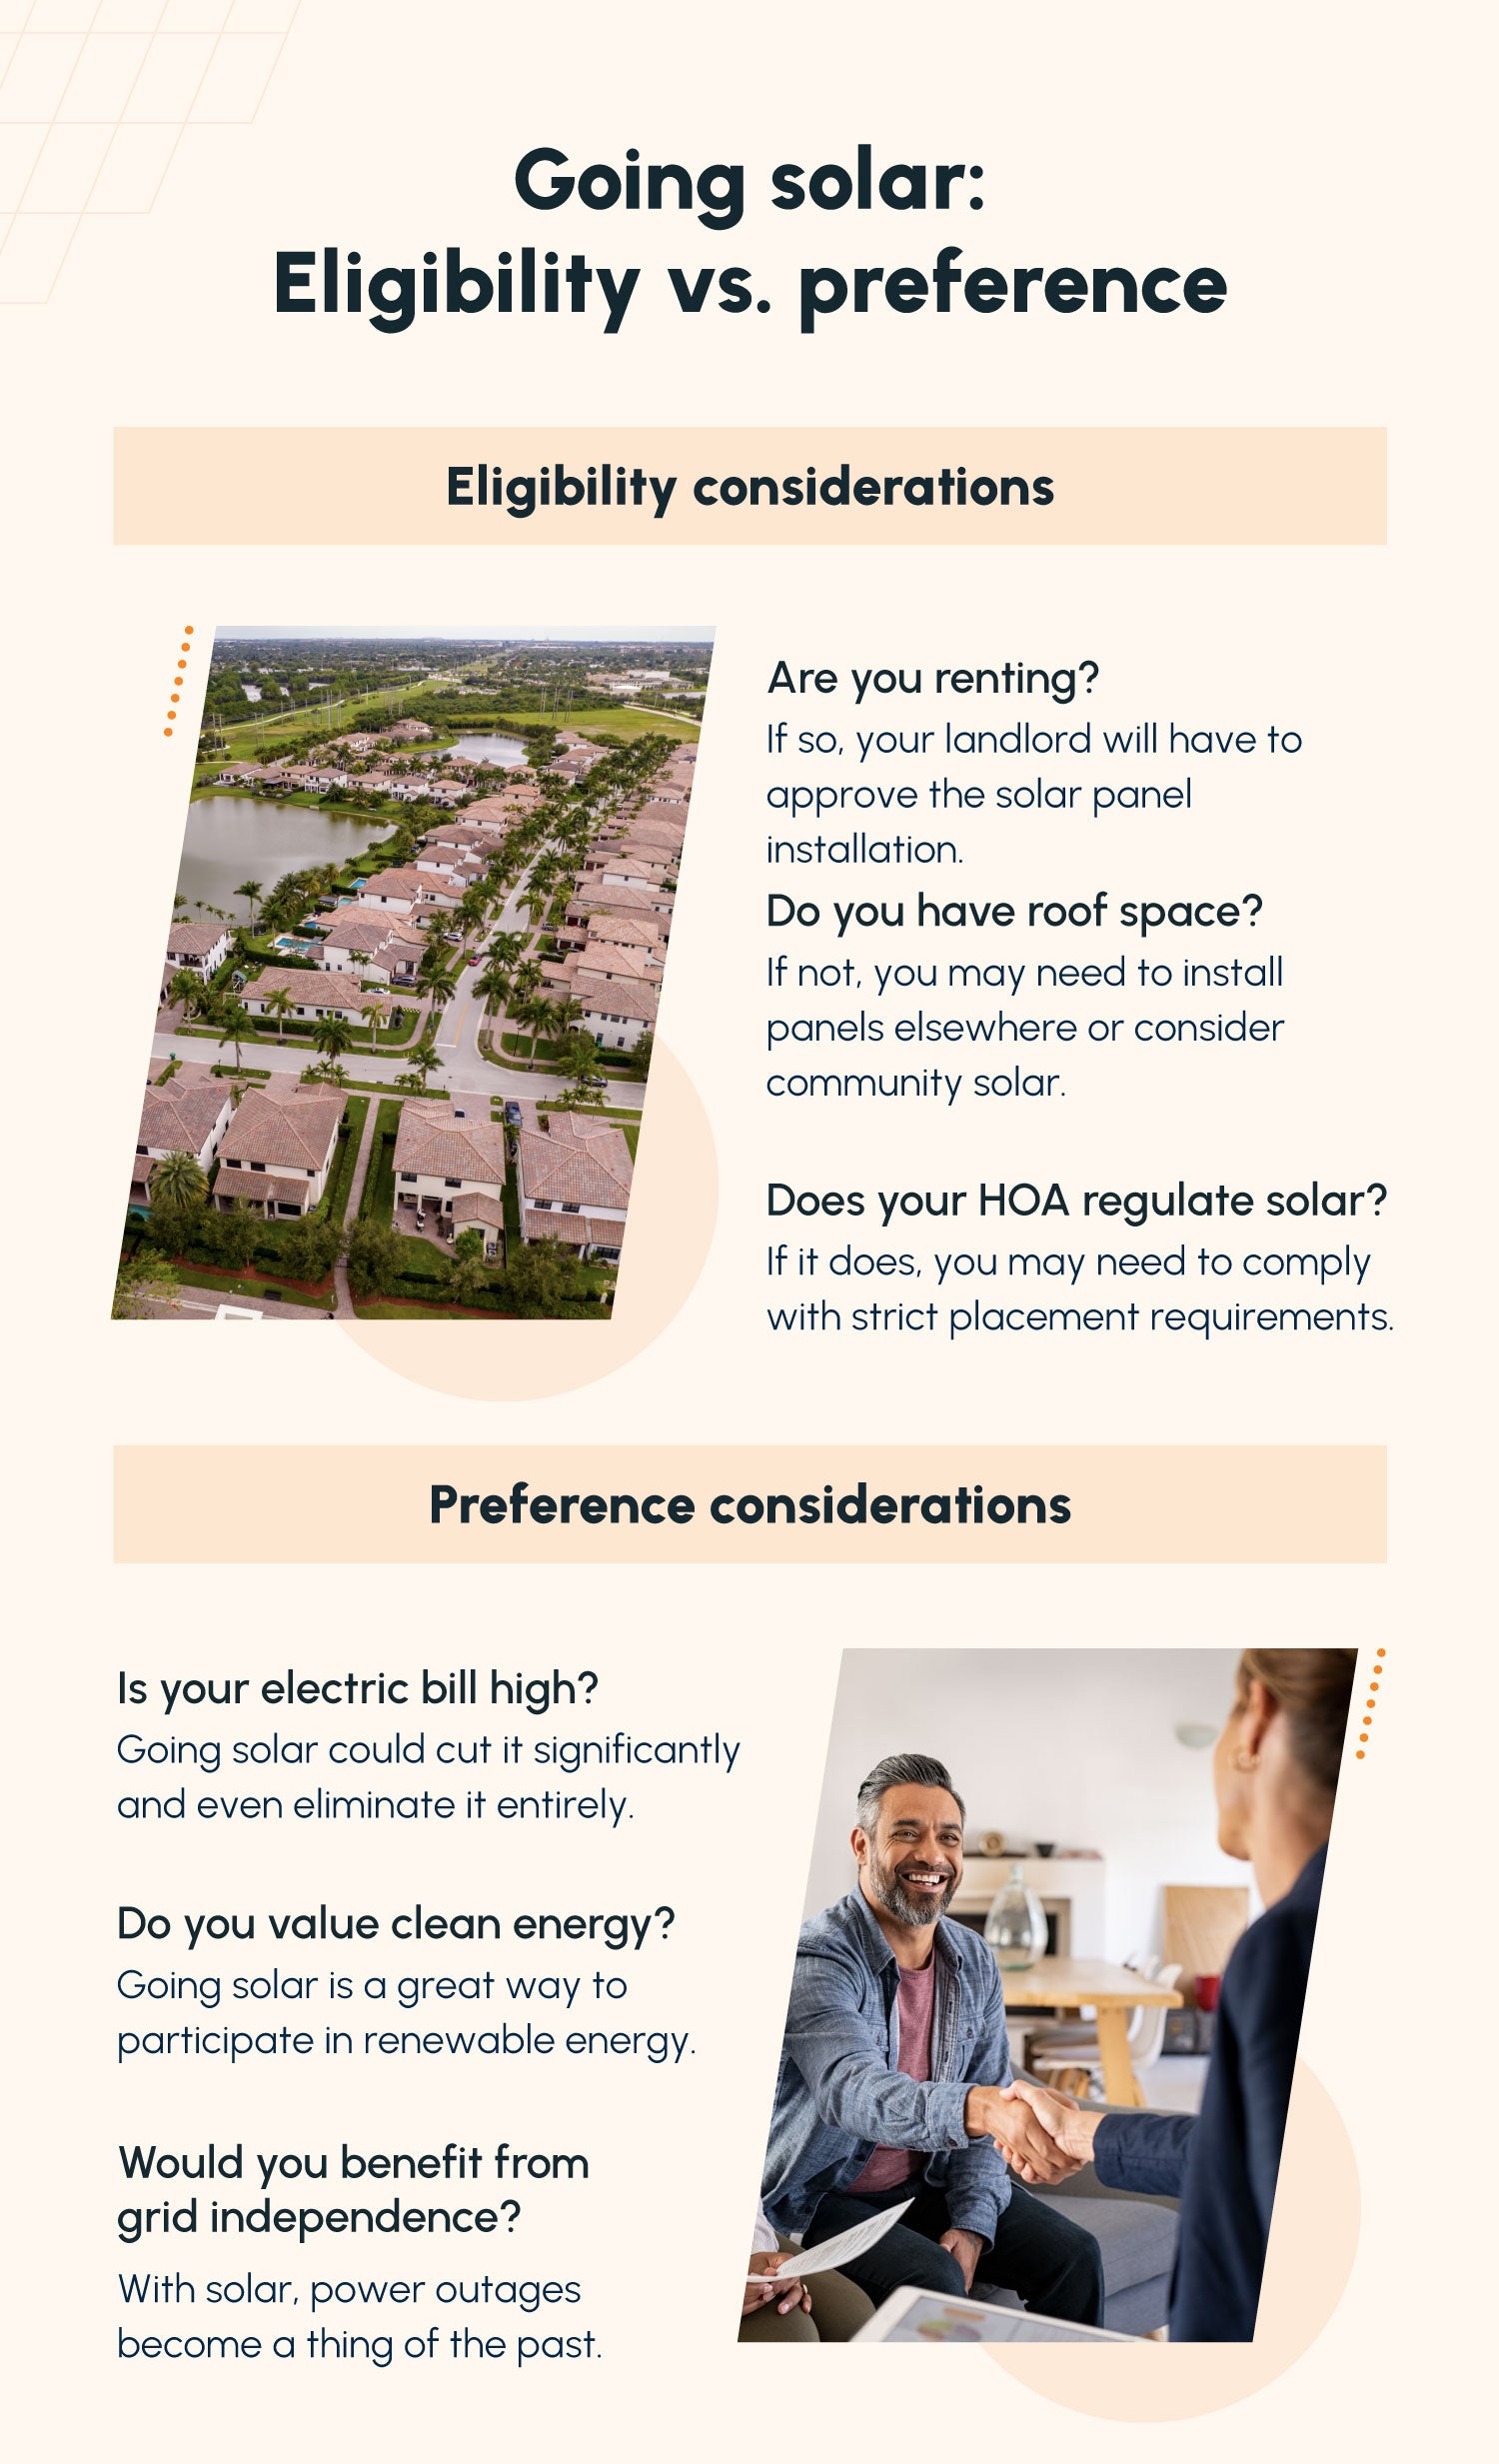 A list of eligibility and preference considerations to keep in mind when deciding whether to install solar panels